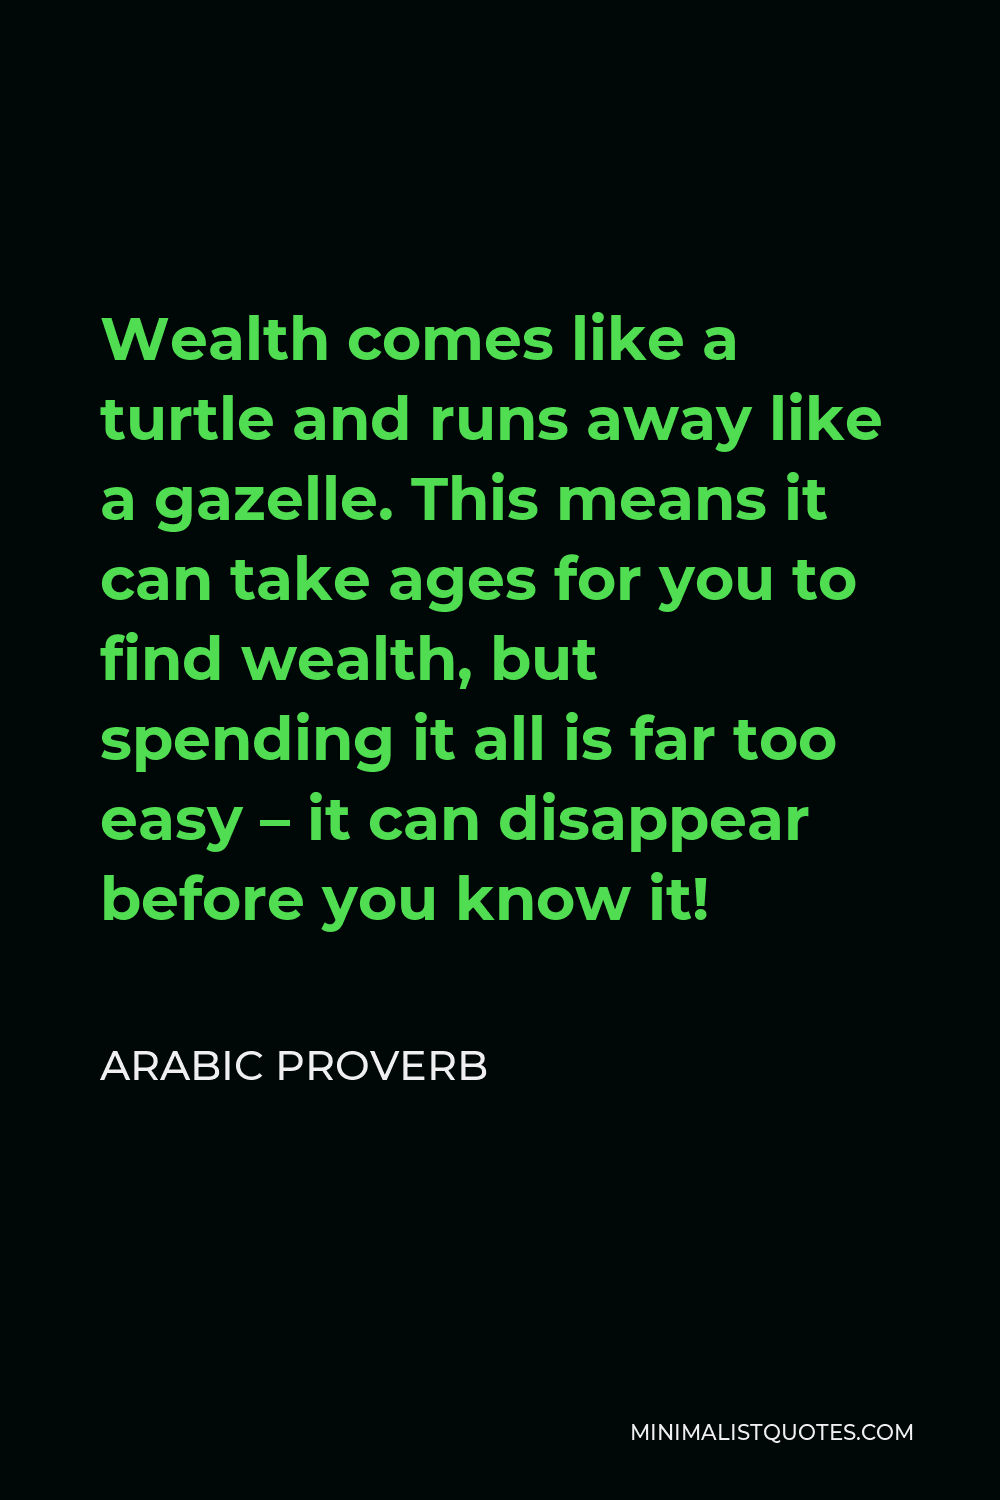 Arabic Proverb Quote - Wealth comes like a turtle and runs away like a gazelle. This means it can take ages for you to find wealth, but spending it all is far too easy – it can disappear before you know it!